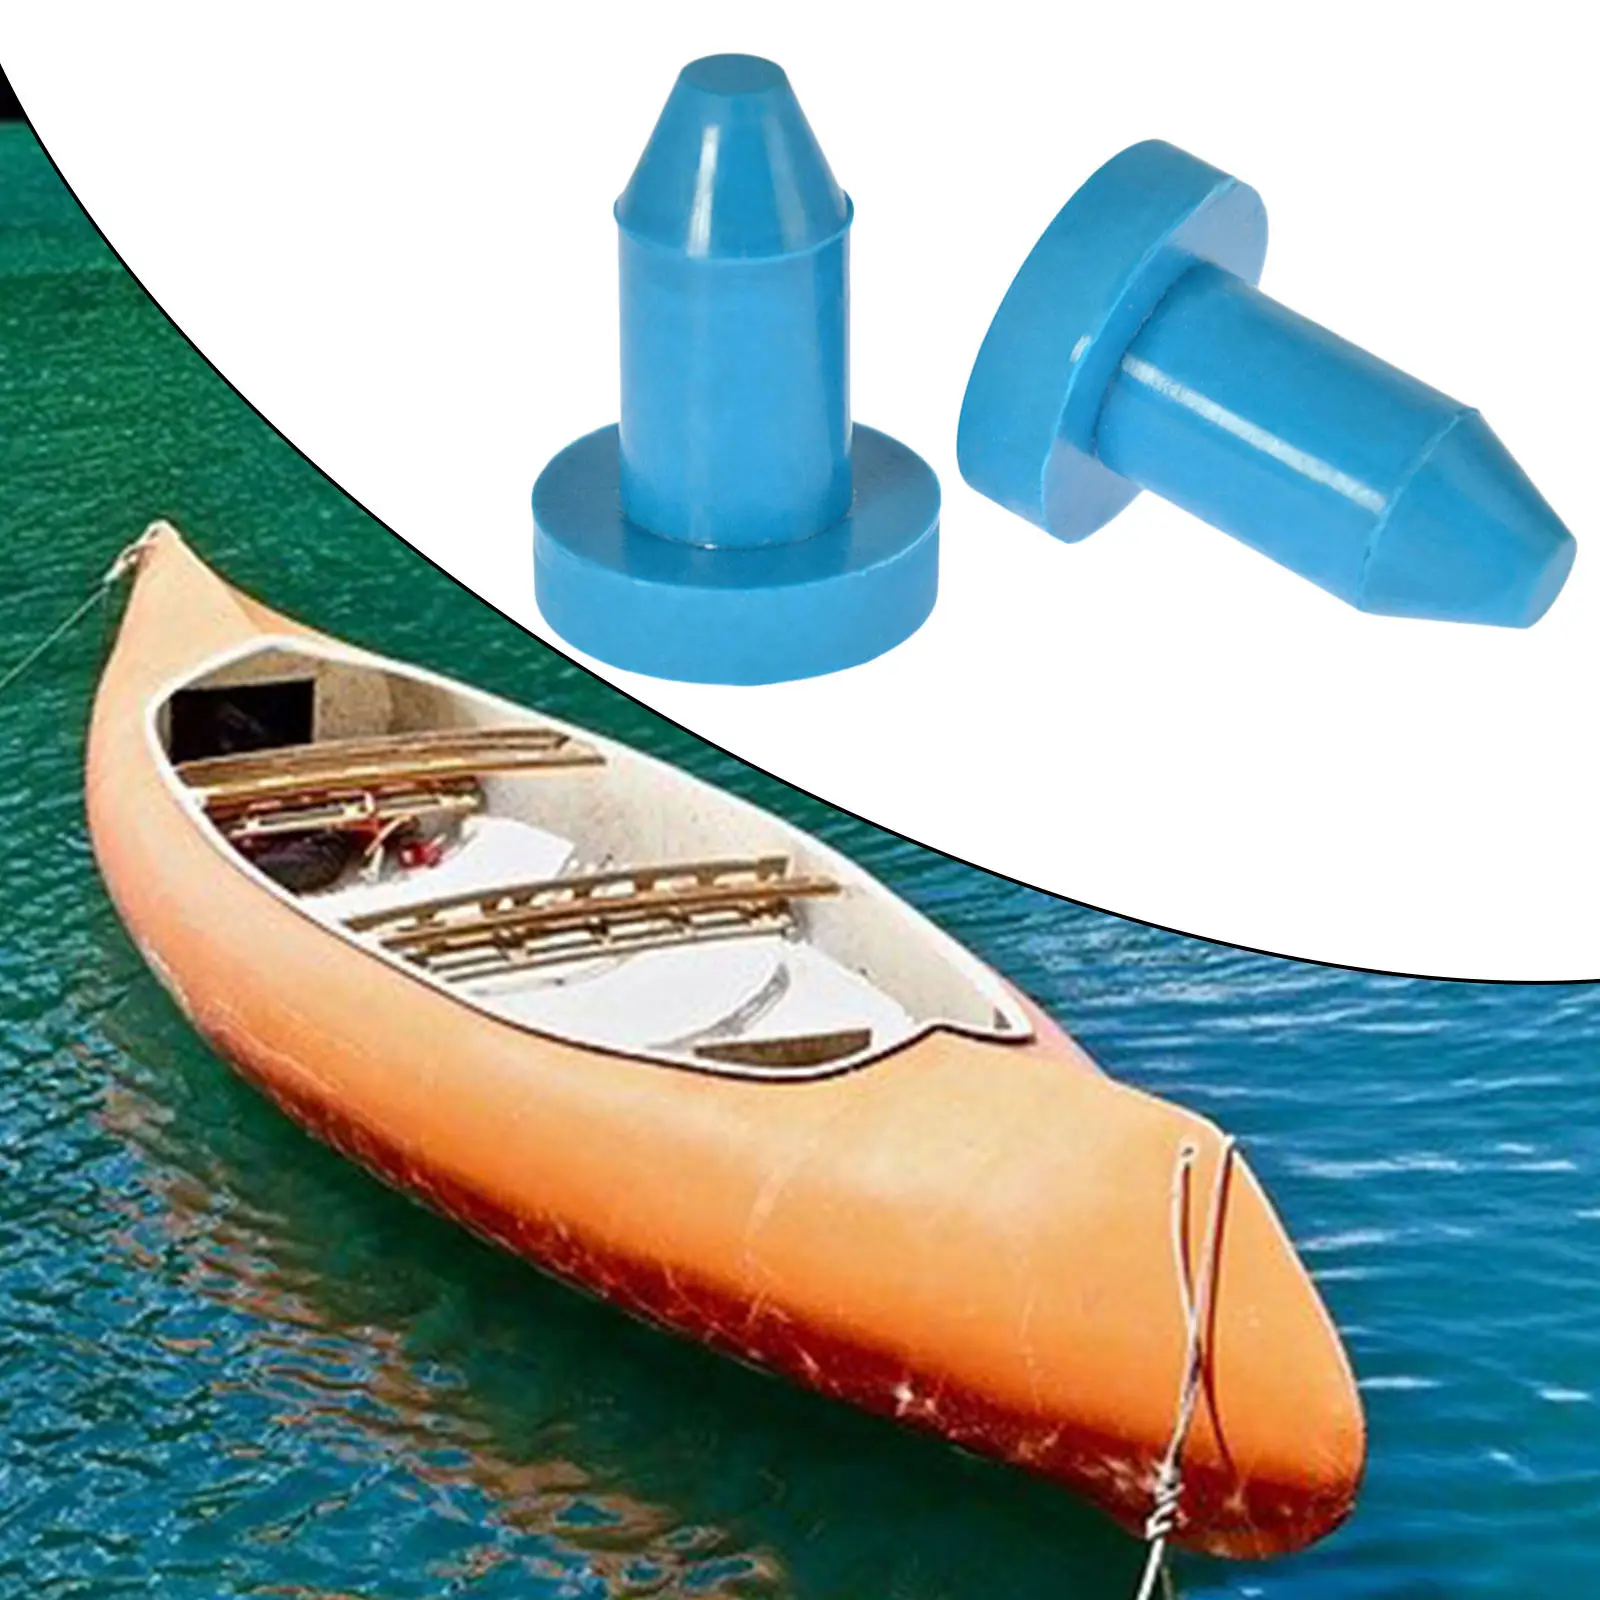 2x Kayak Drain Plugs Drain Holes Stoppers for Kayaks Fishing Boats Replaces 